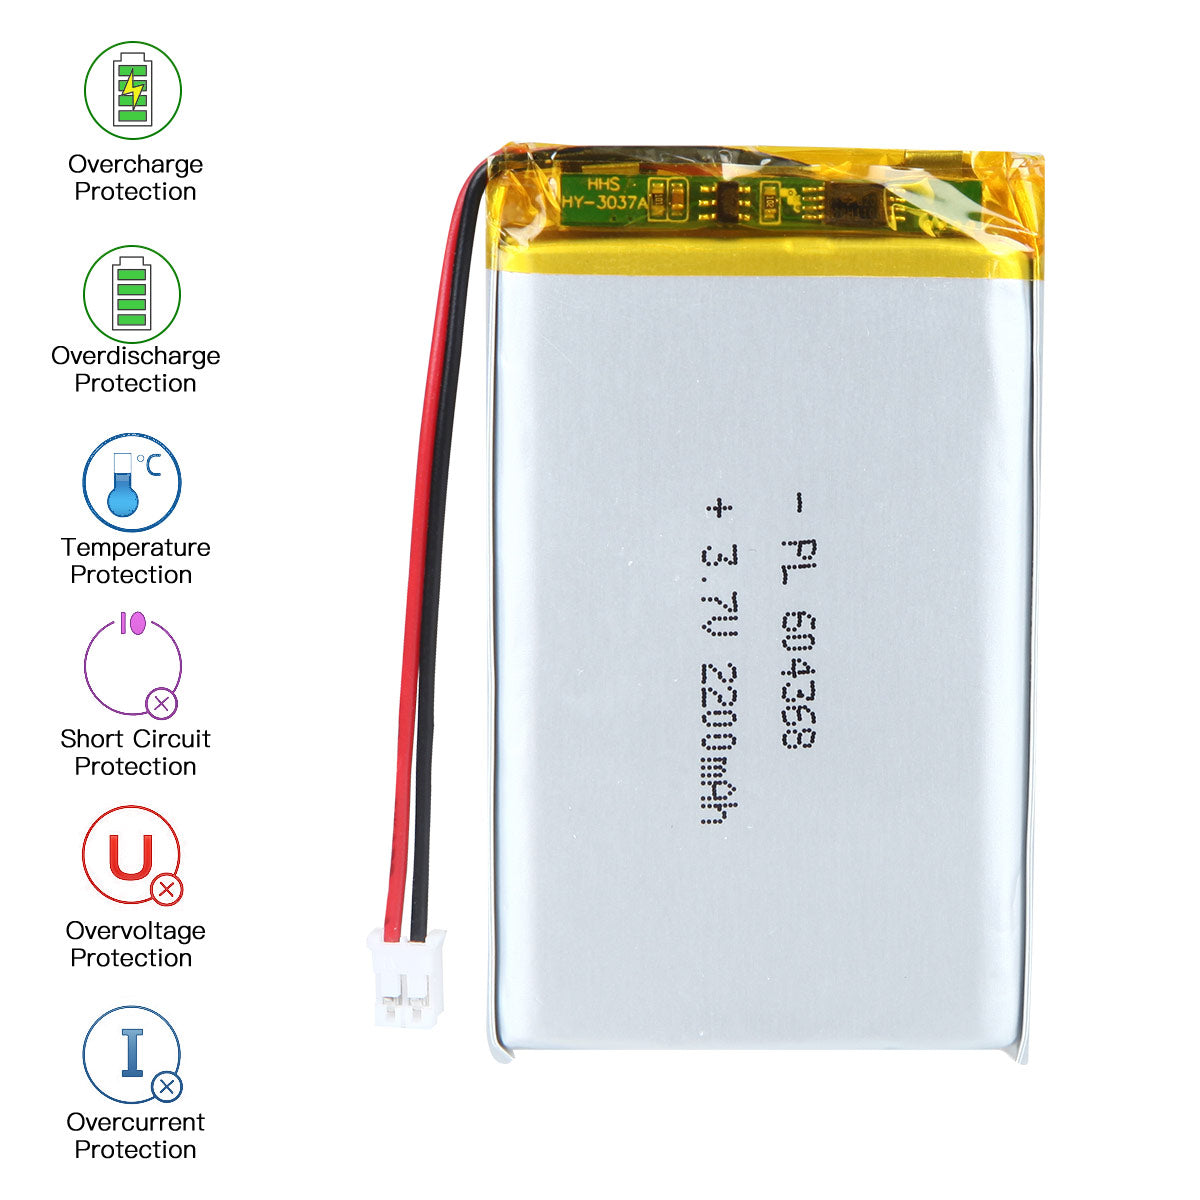 YDL 3.7V 2200mAh 604368 Rechargeable Lithium Polymer Battery